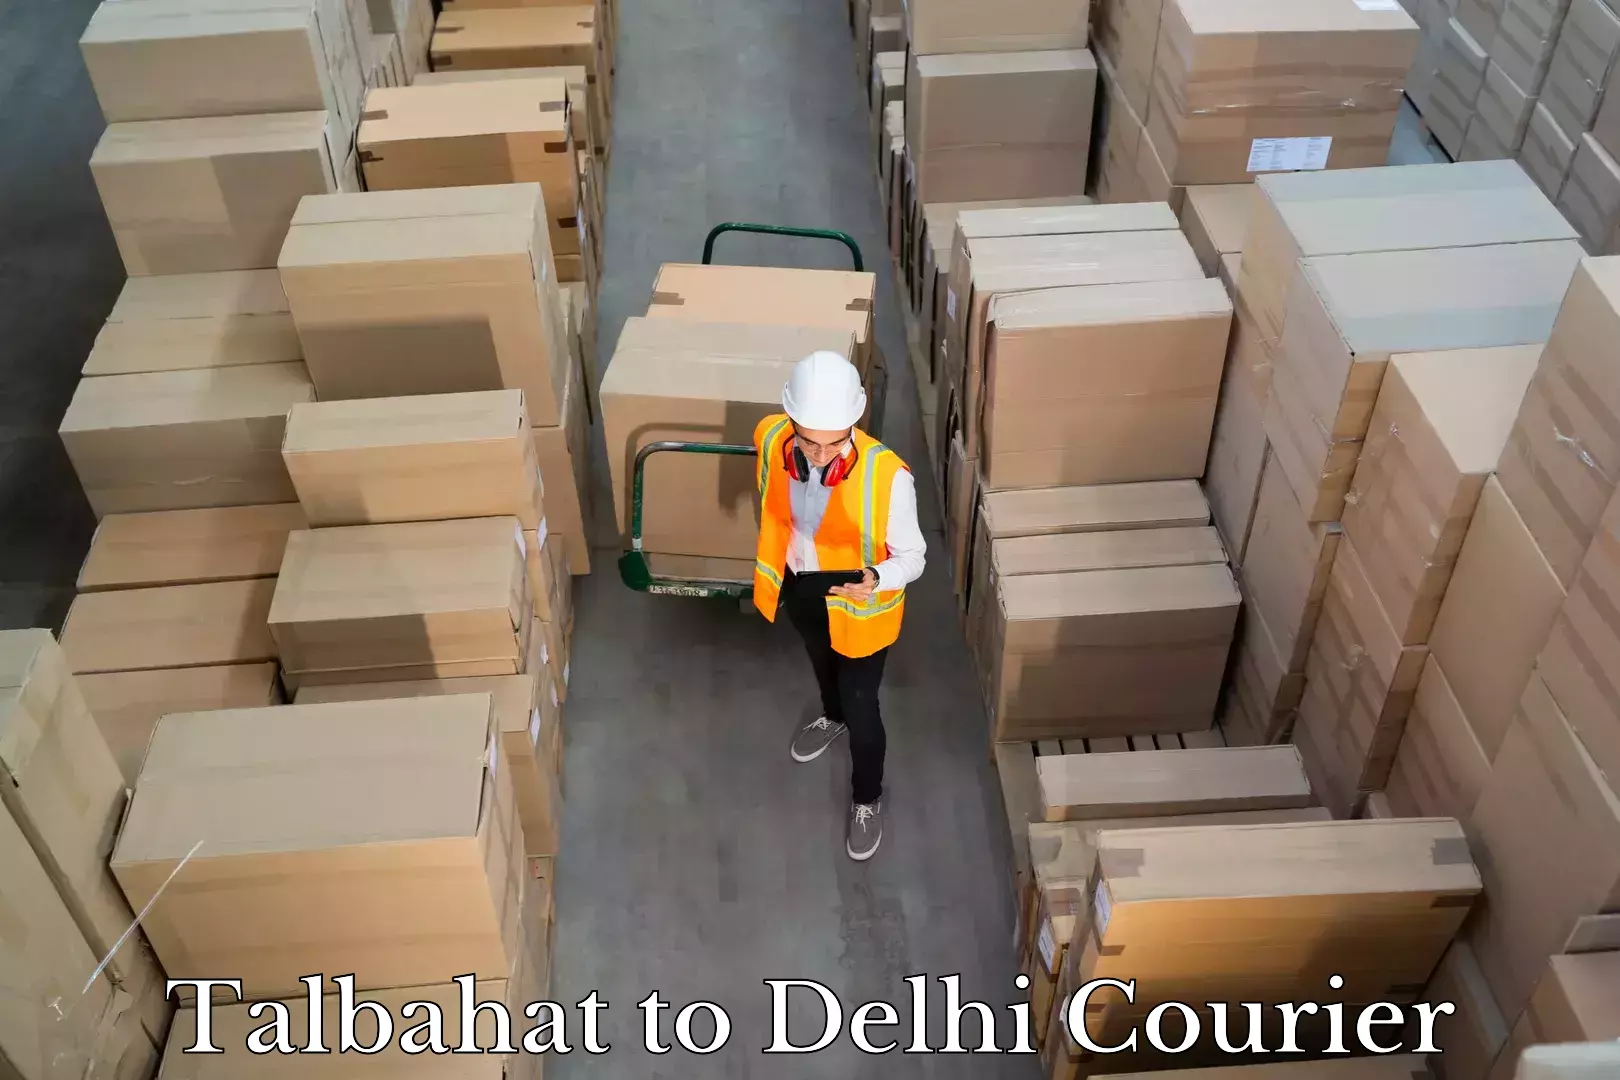 Baggage transport network Talbahat to East Delhi